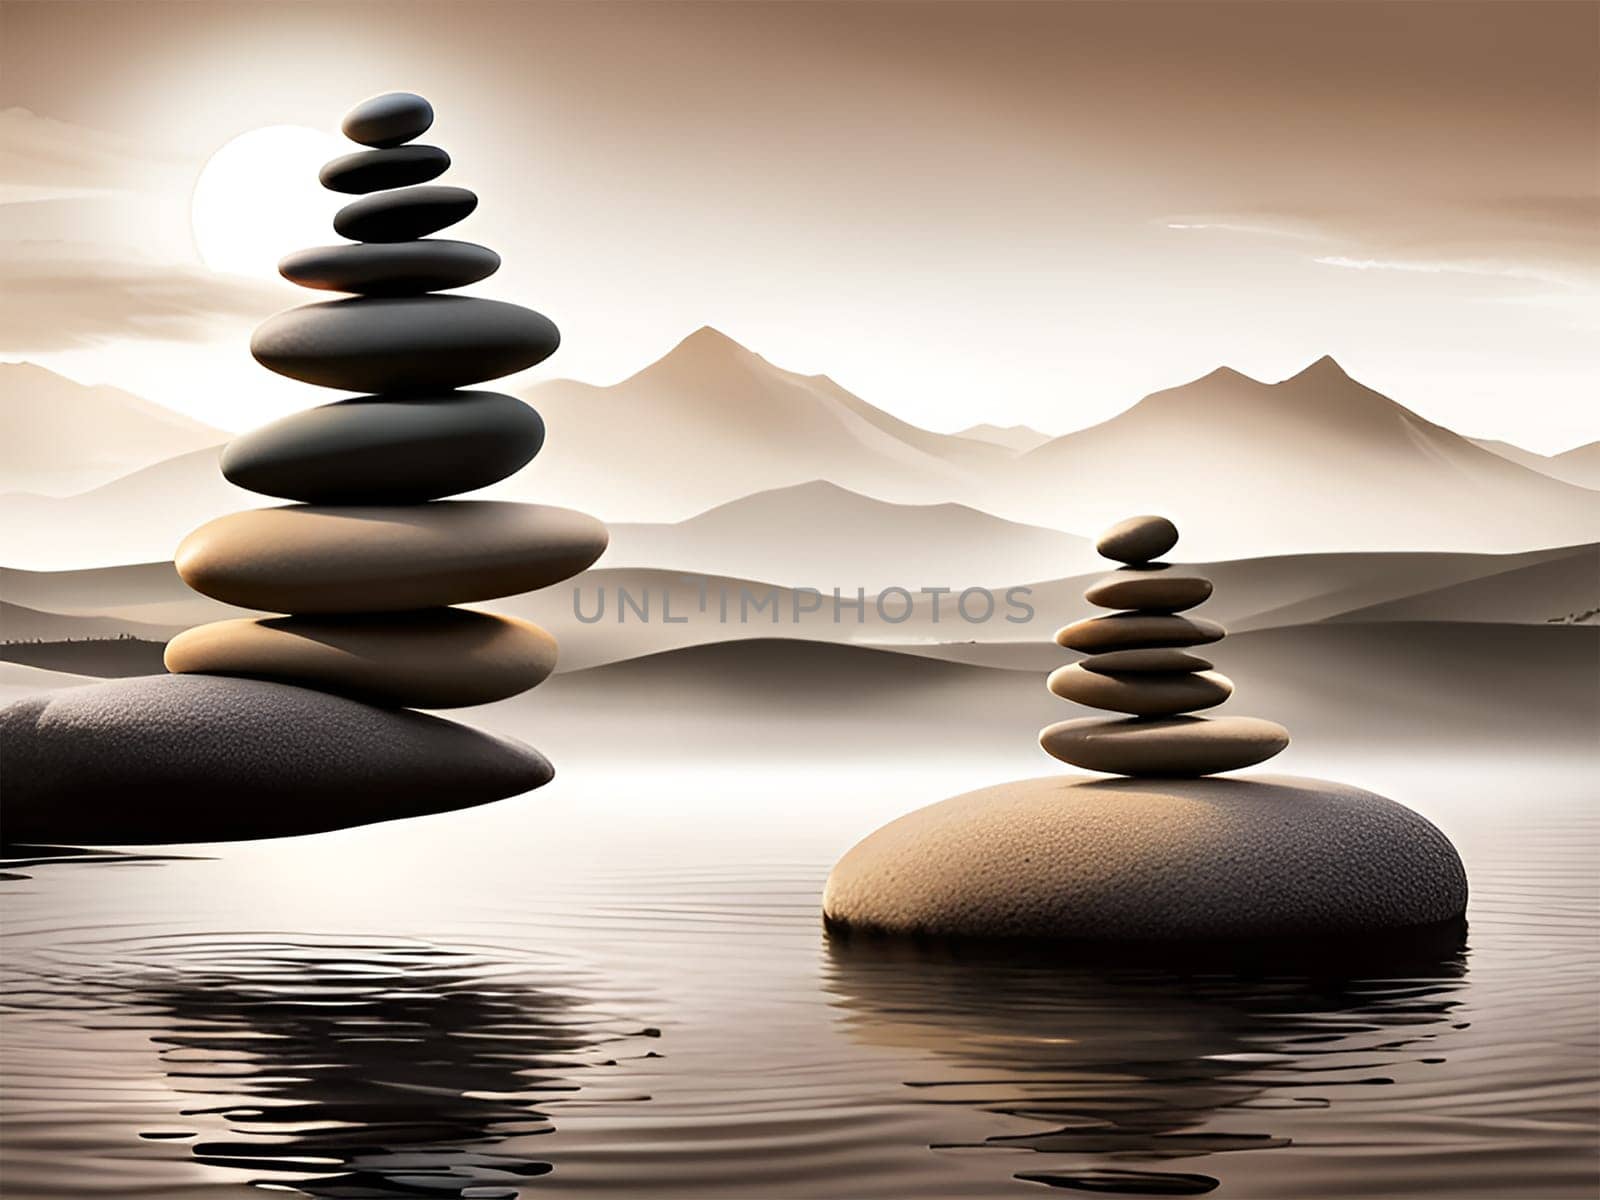 Zen stone in balance in peaceful landscape - AI generated by Elenaphotos21